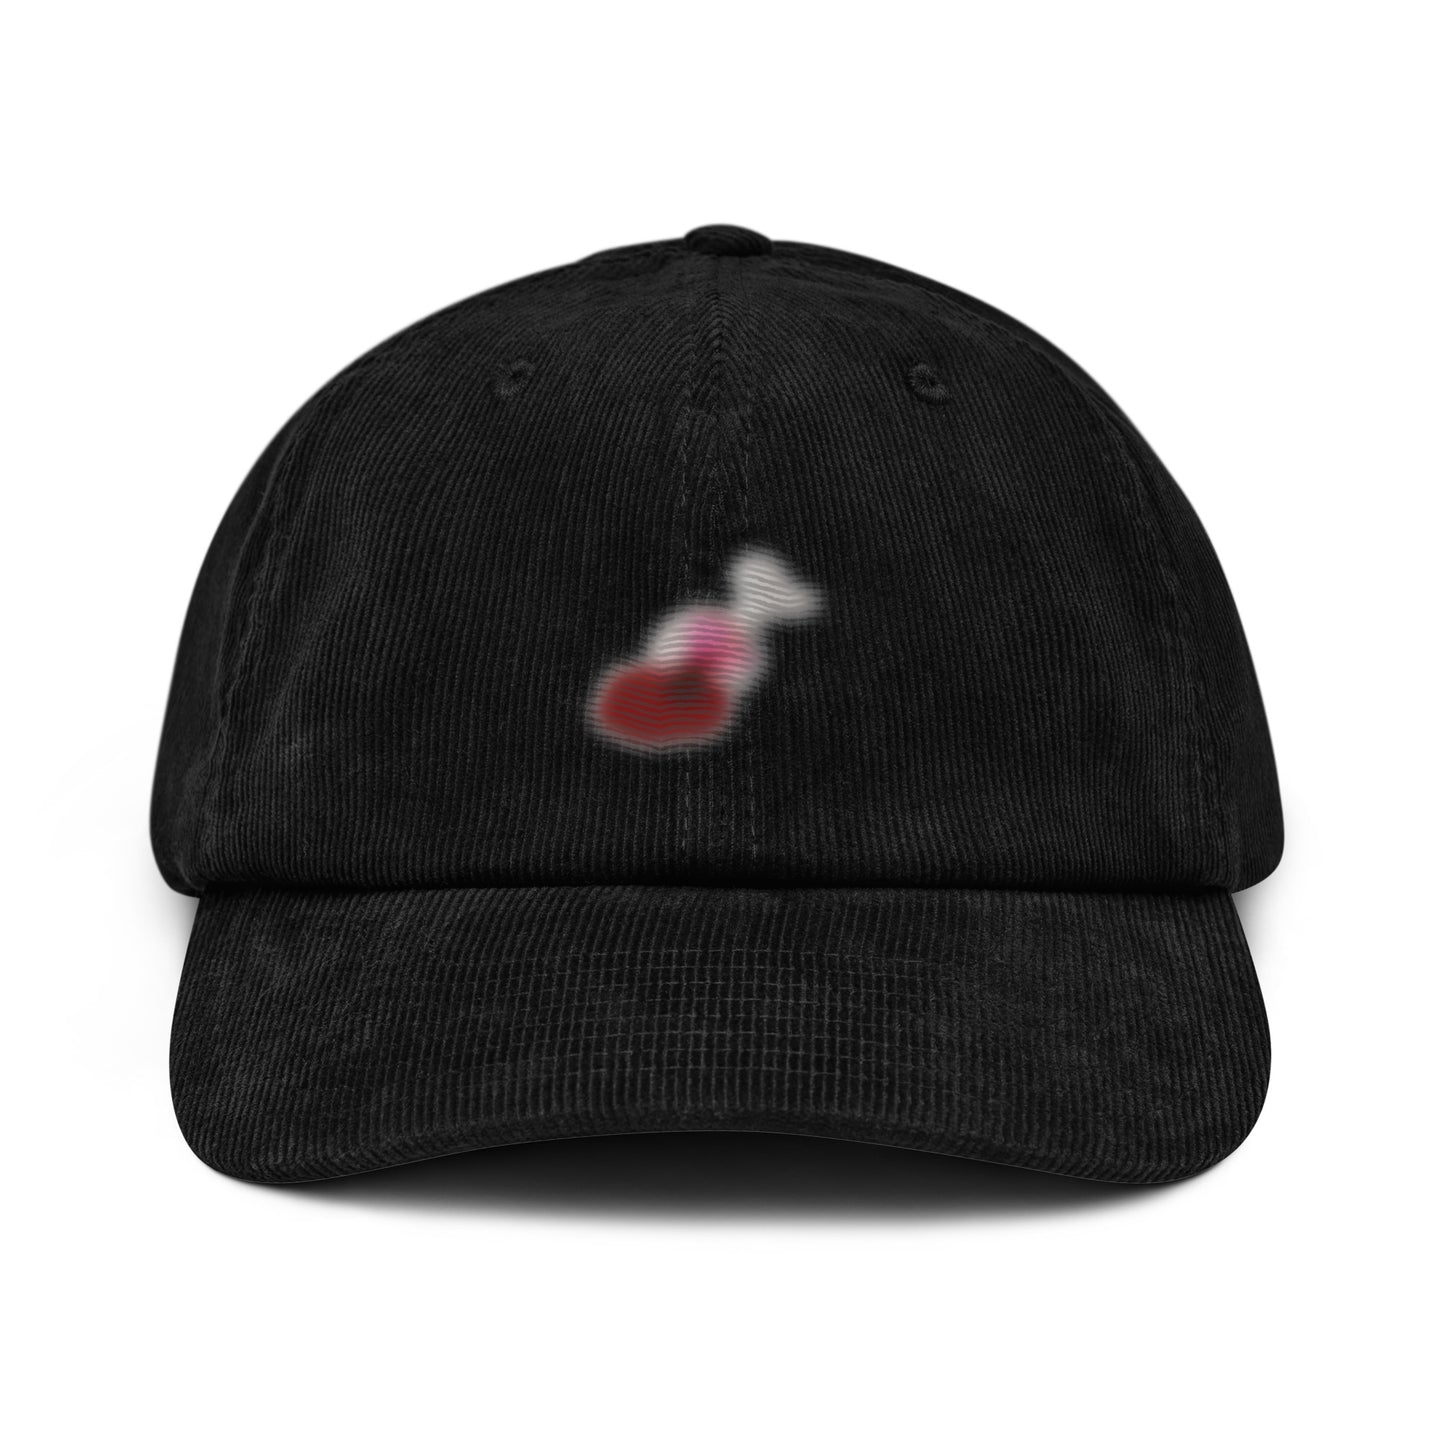 Corduroy hat - The more there is fake, the more we need real